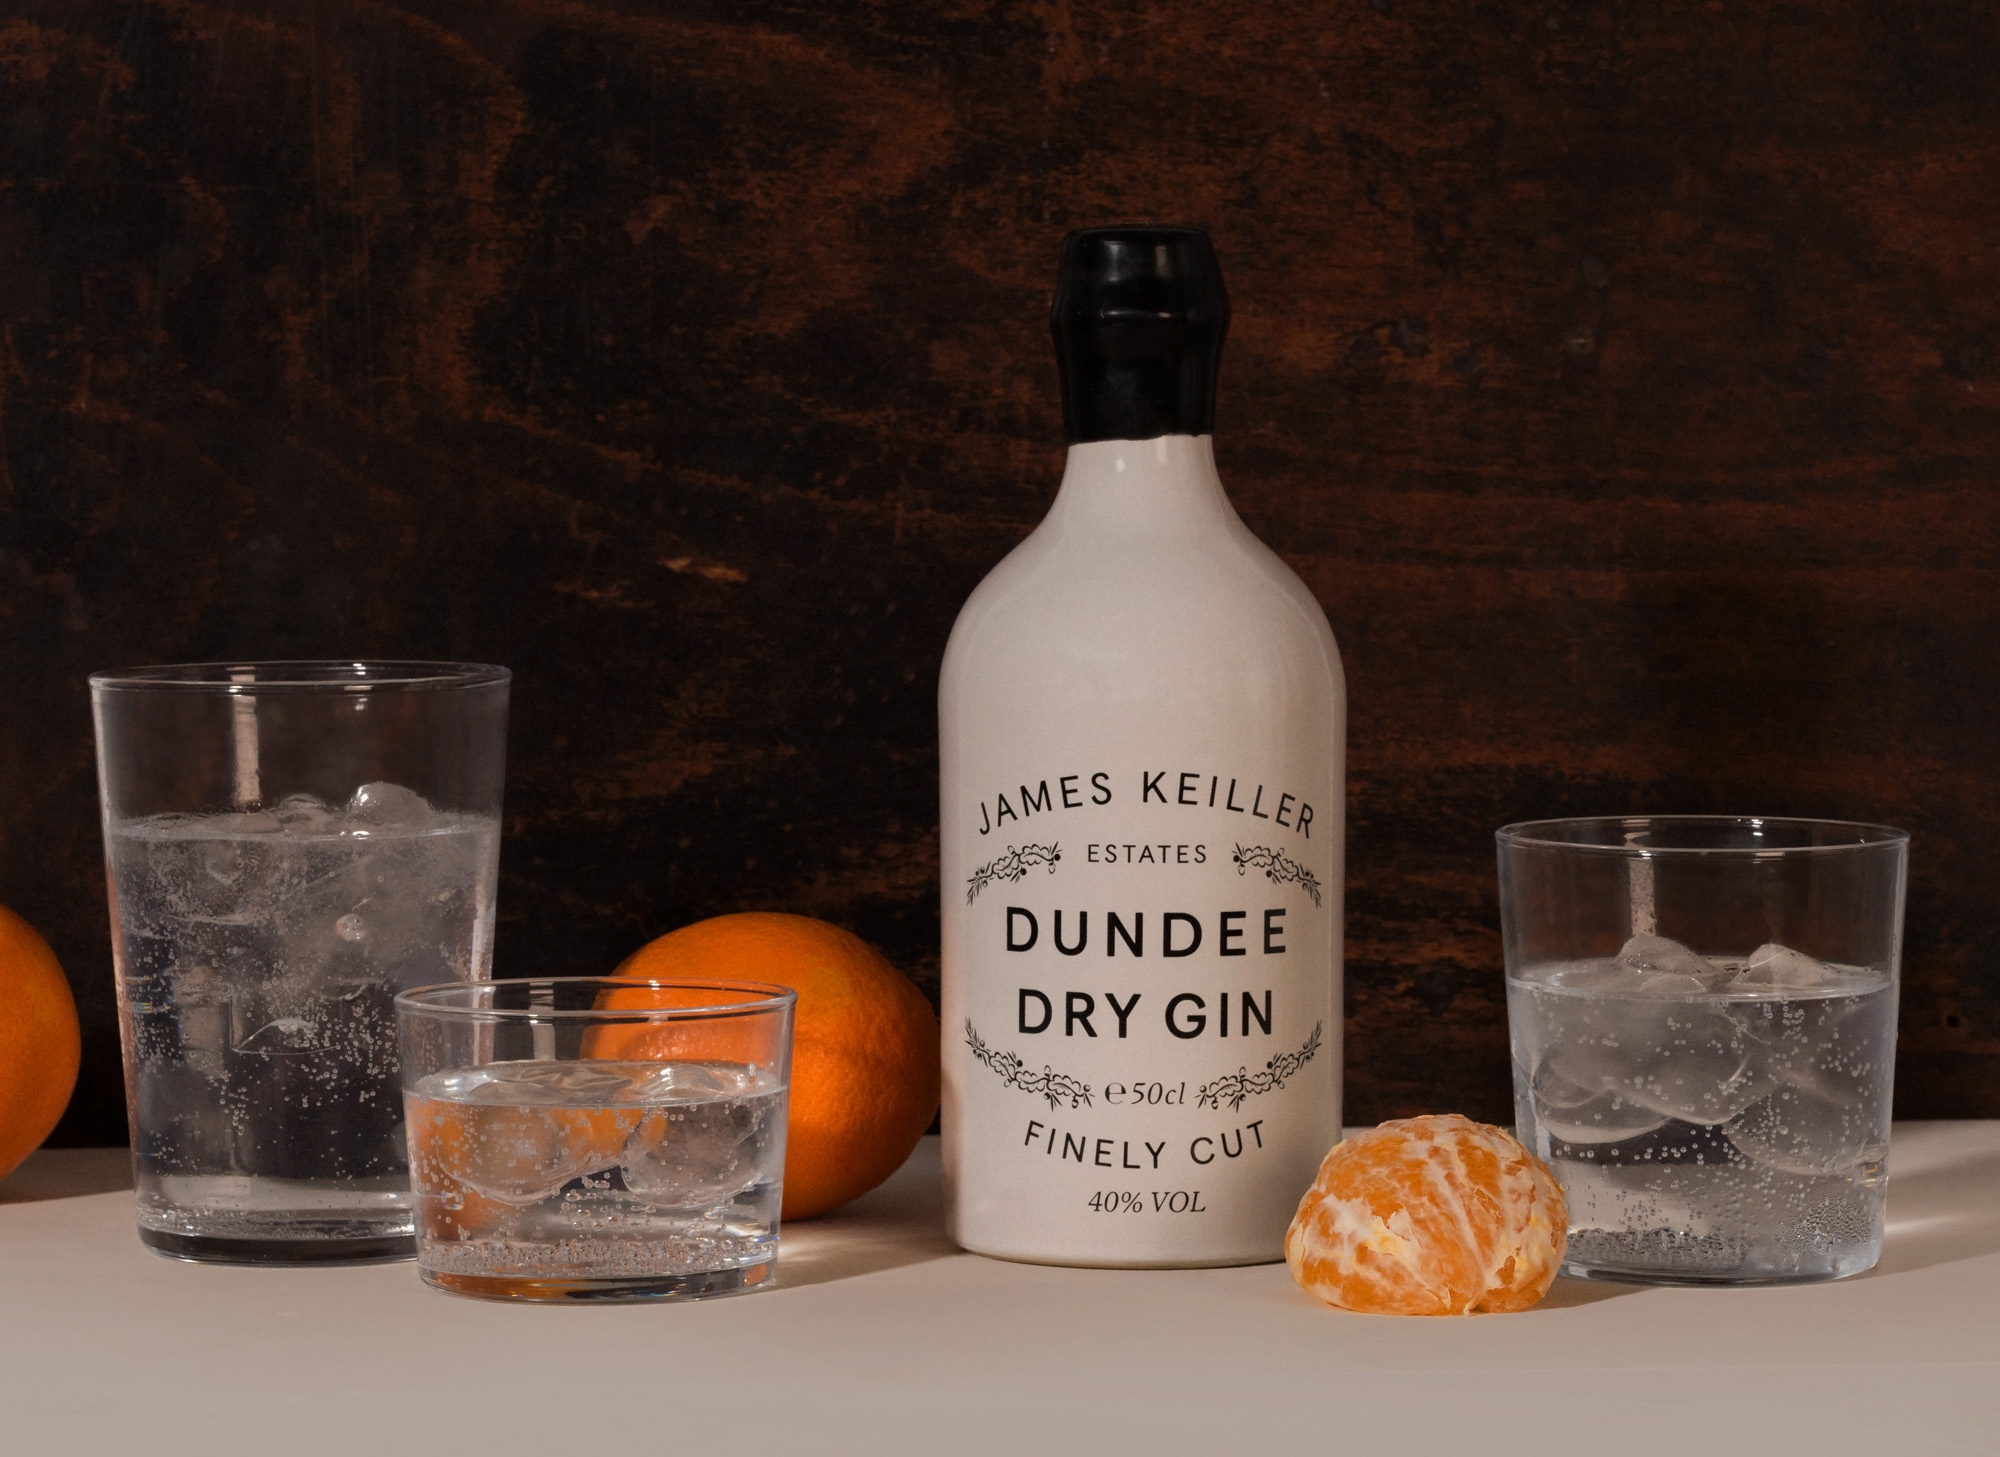 Keillers Dundee Dry Gin with oranges and glasses of liquid and ice